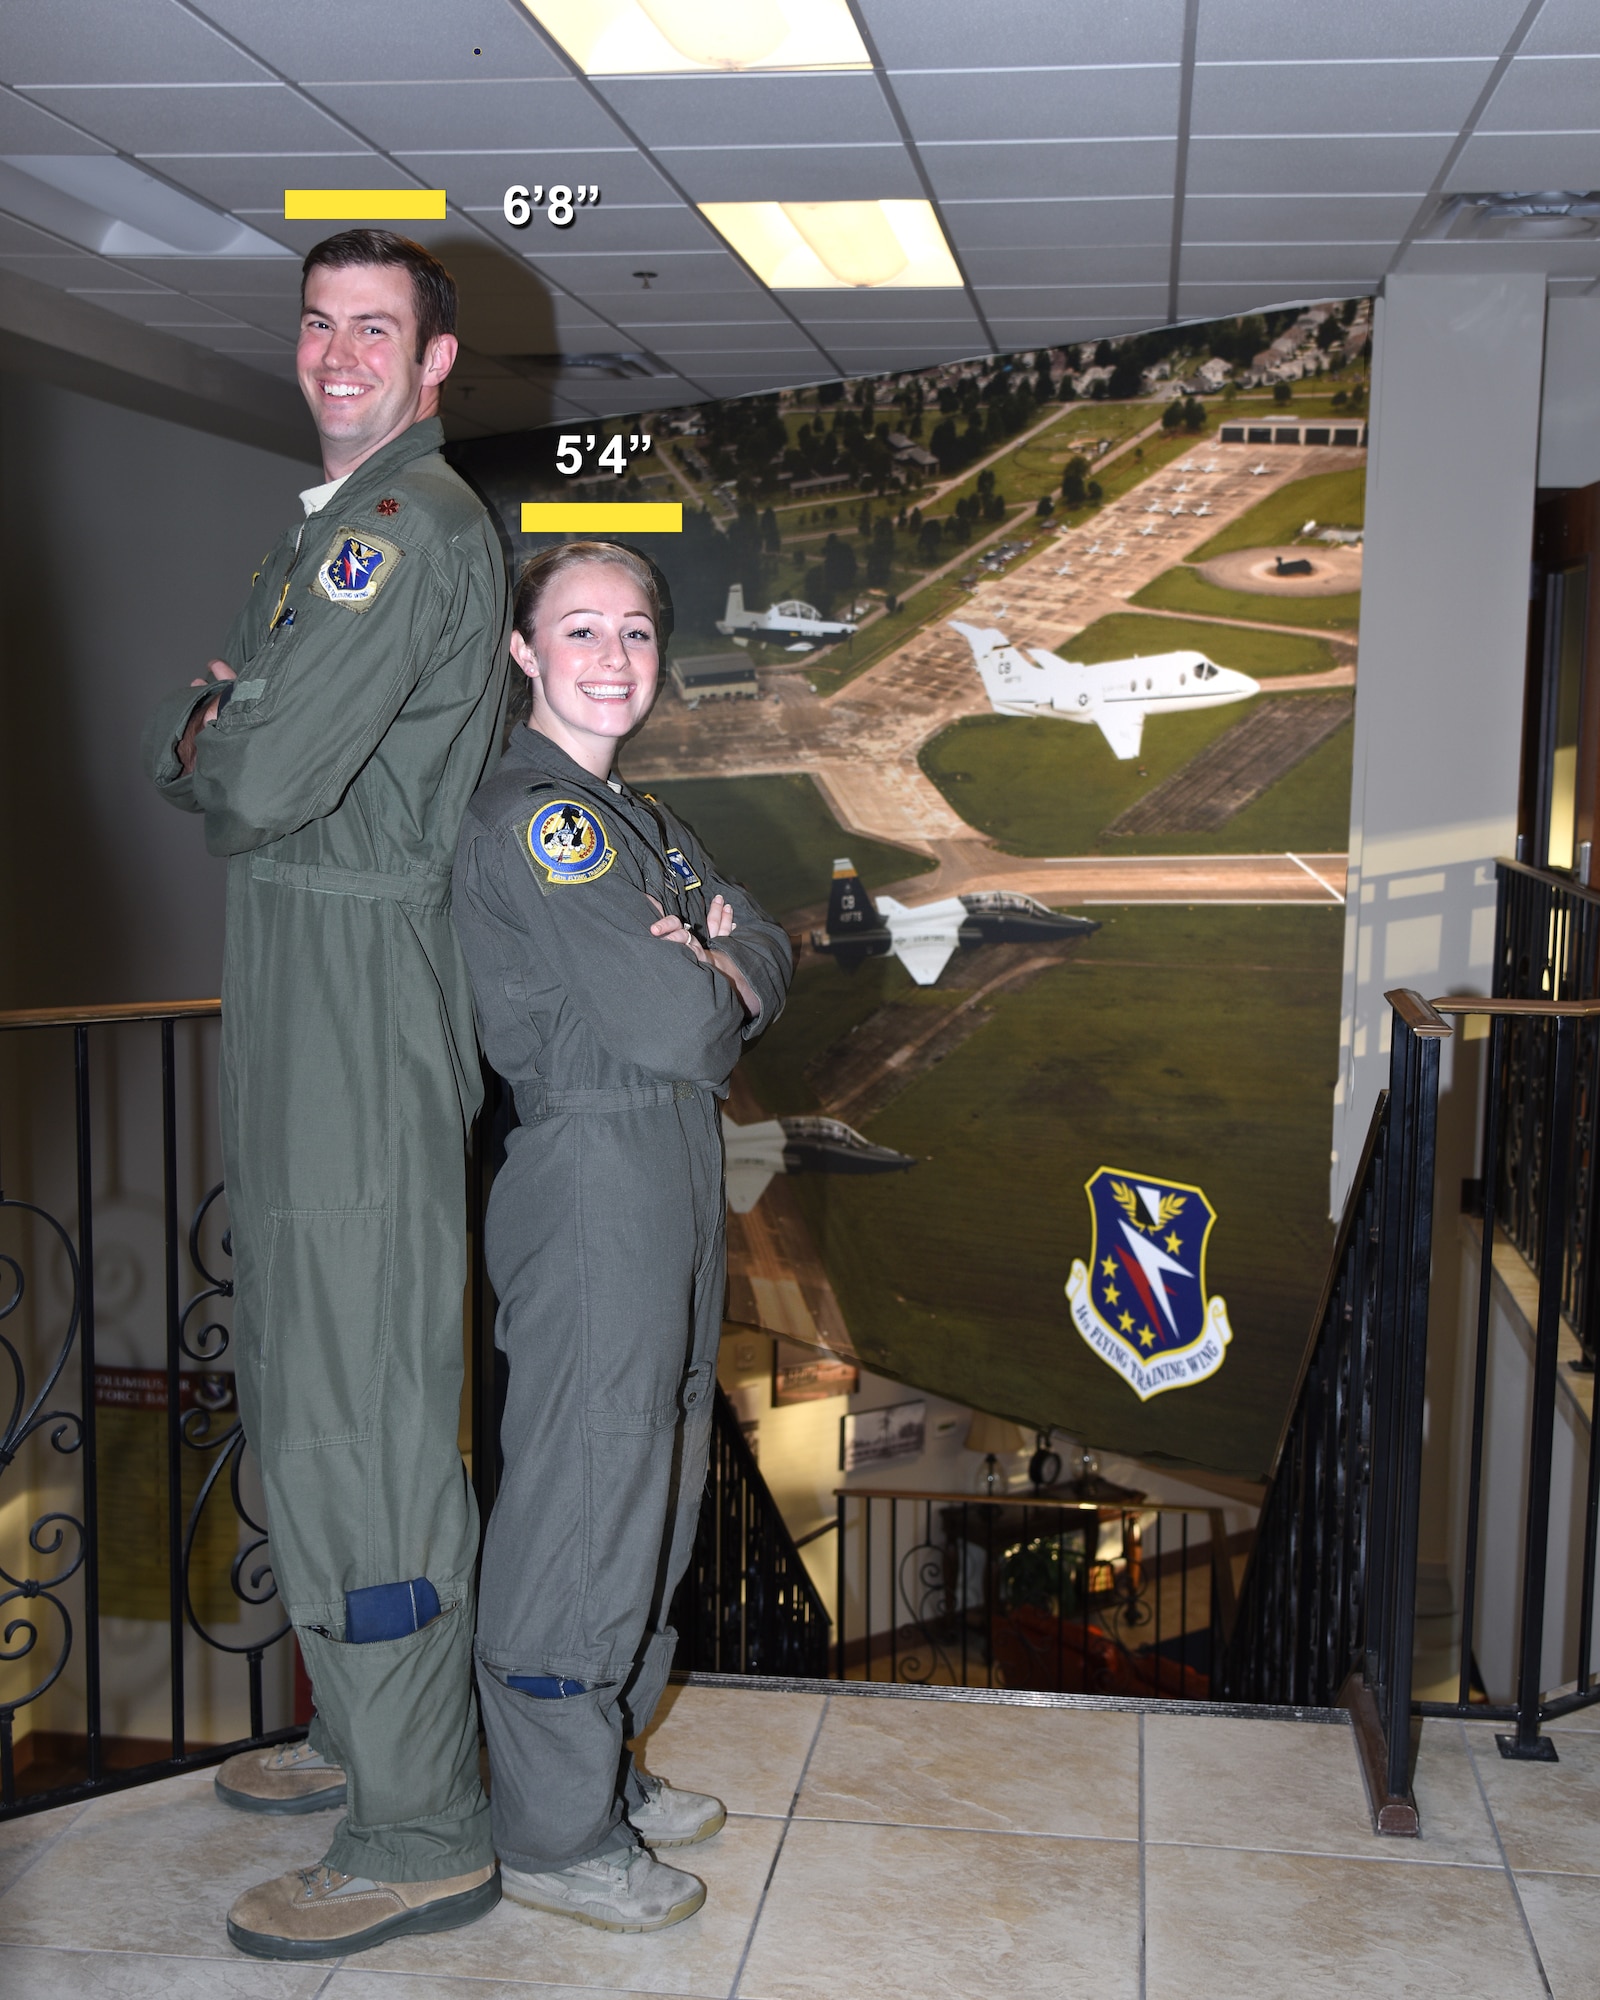 Maj. Nate and 1st Lt. Christina Nicholson, 48th Flying Training Squadron instructor pilot, stand next to each other to show their height difference Oct. 30, 2019, on Columbus Air Force Base, Miss. The standing height requirements to become a pilot are a minimum 5 feet 4 inches and maximum 6 feet 5 inches, but can be dismissed through the waiver process. (U.S. Air Force photo by Sharon Ybarra)